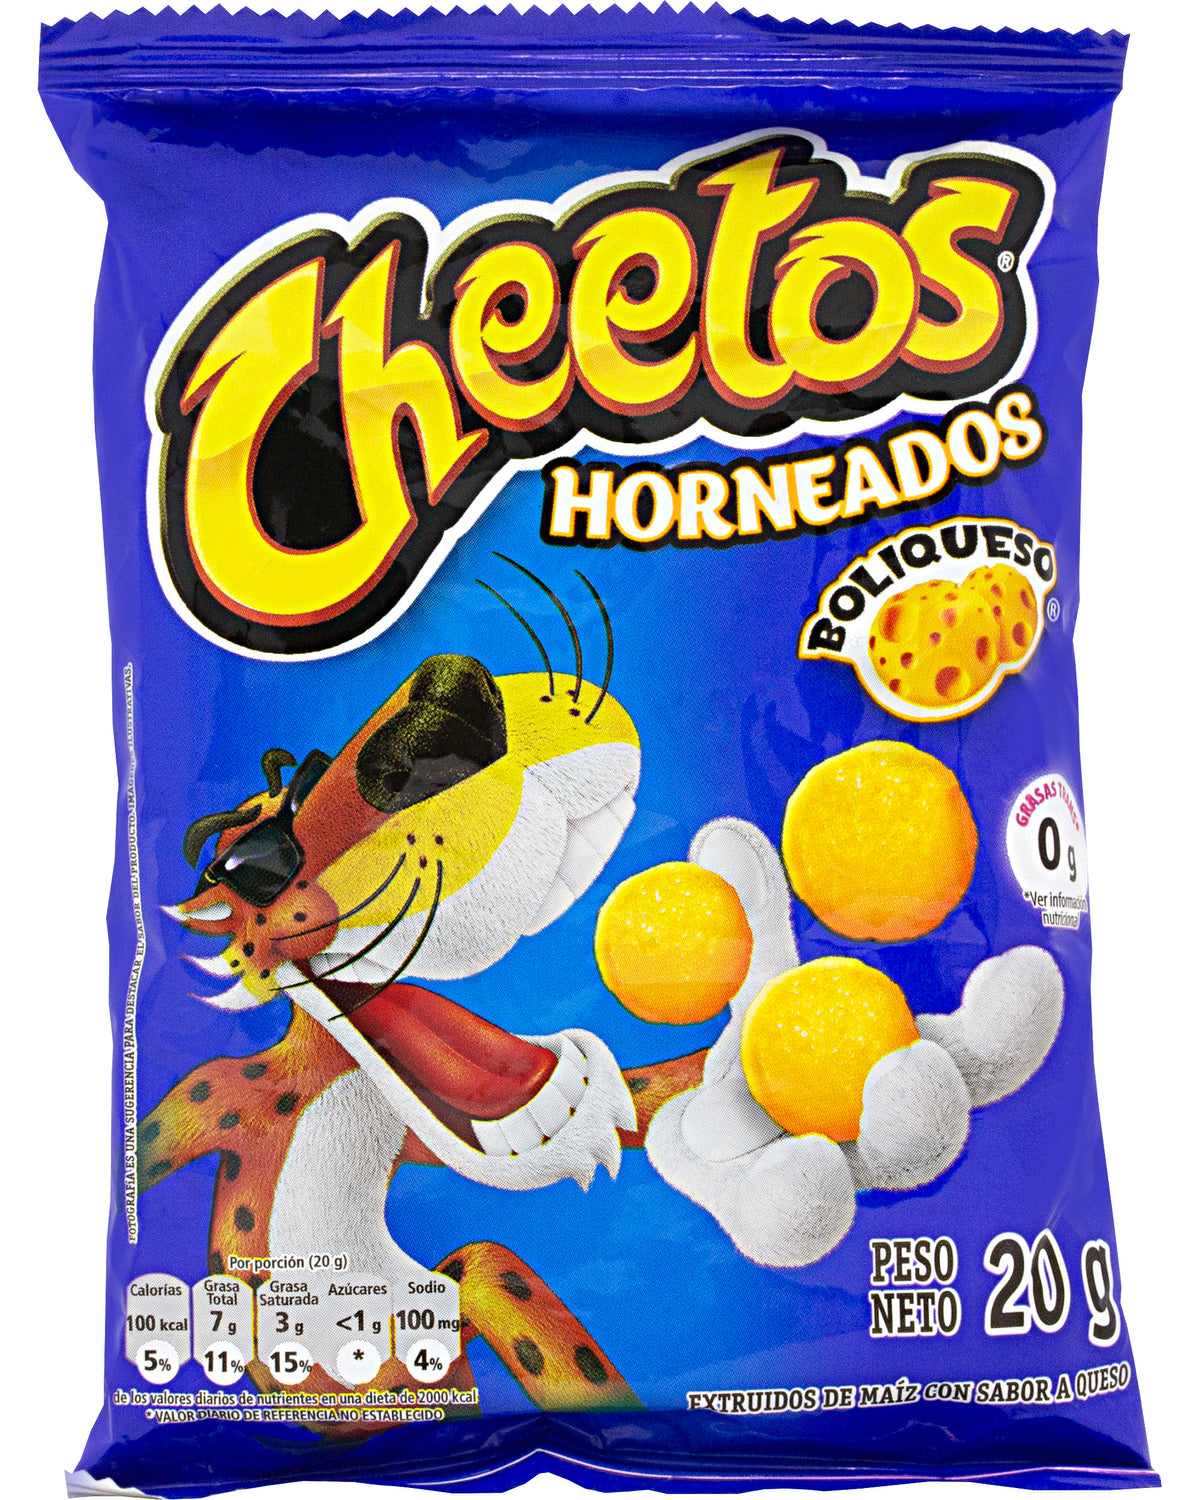 Cheetos Crunchy 8.5oz - Delivered In As Fast As 15 Minutes